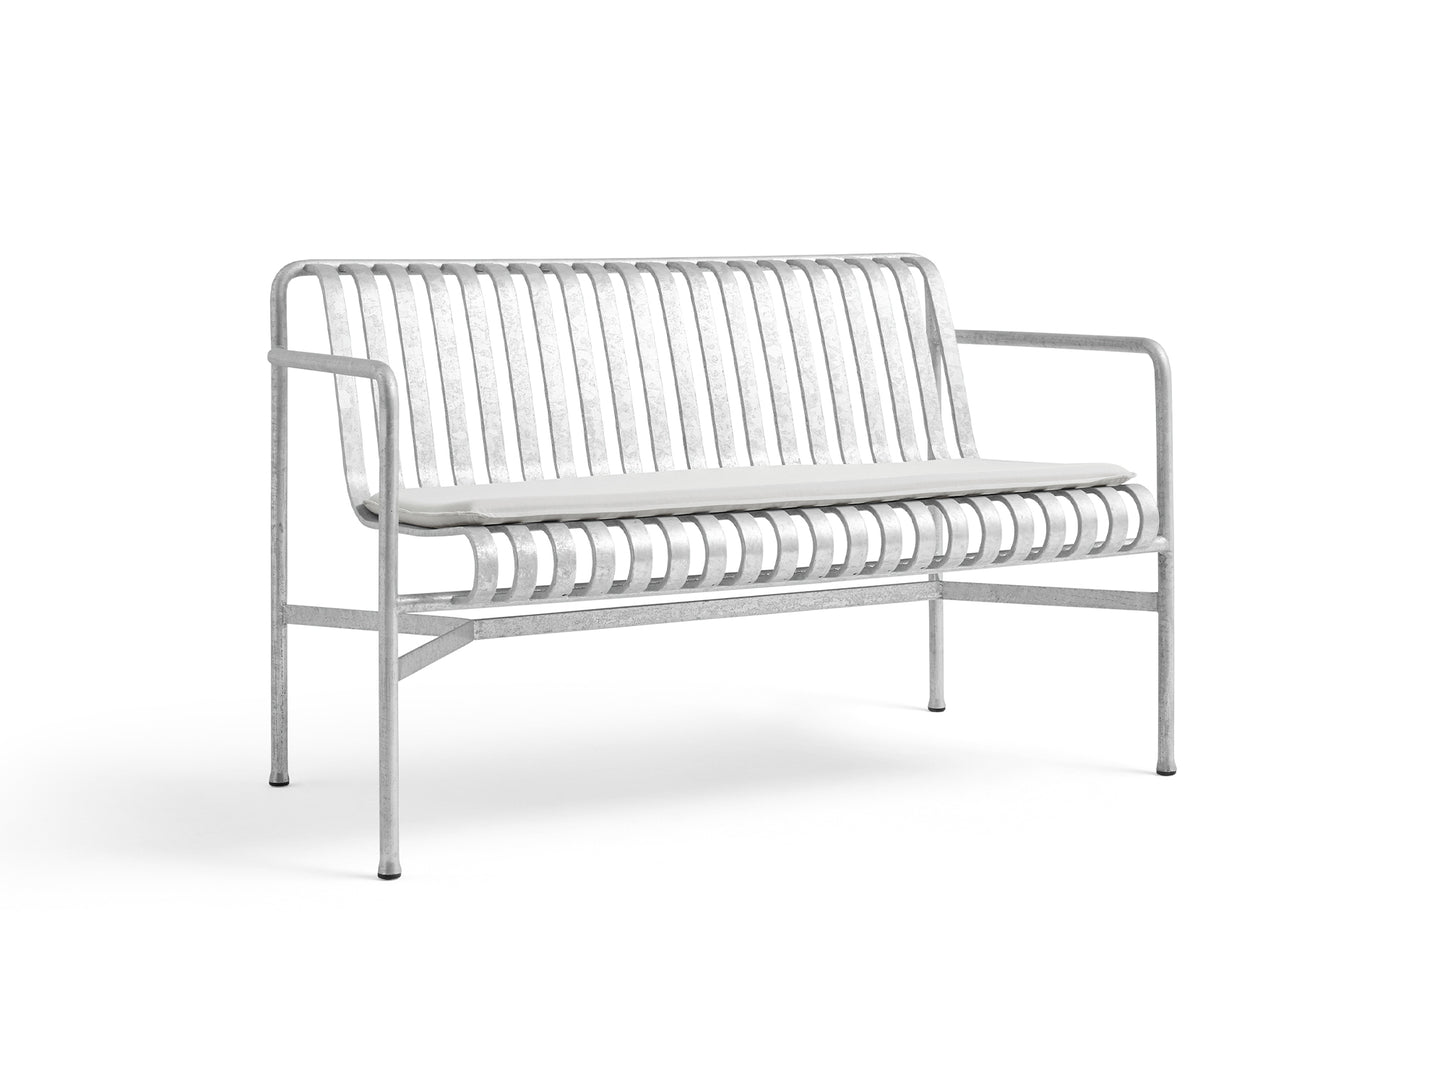 Palissade Dining Bench Seat Cushion by HAY - Hot Galvanised